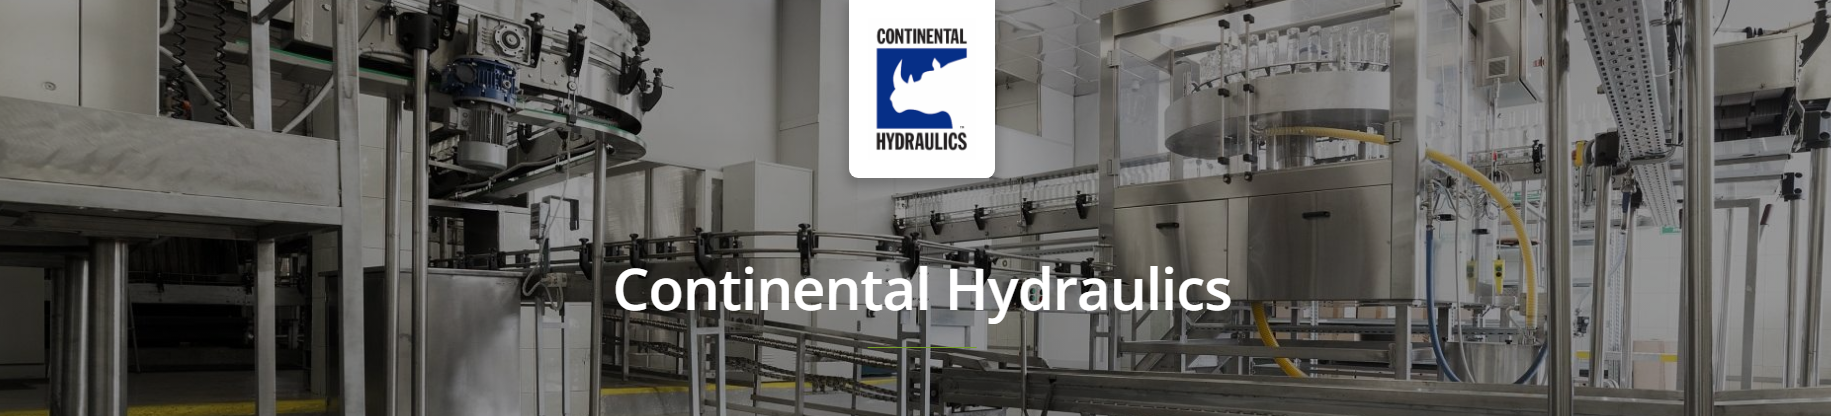 Continental Hydraulics Proportional Valves